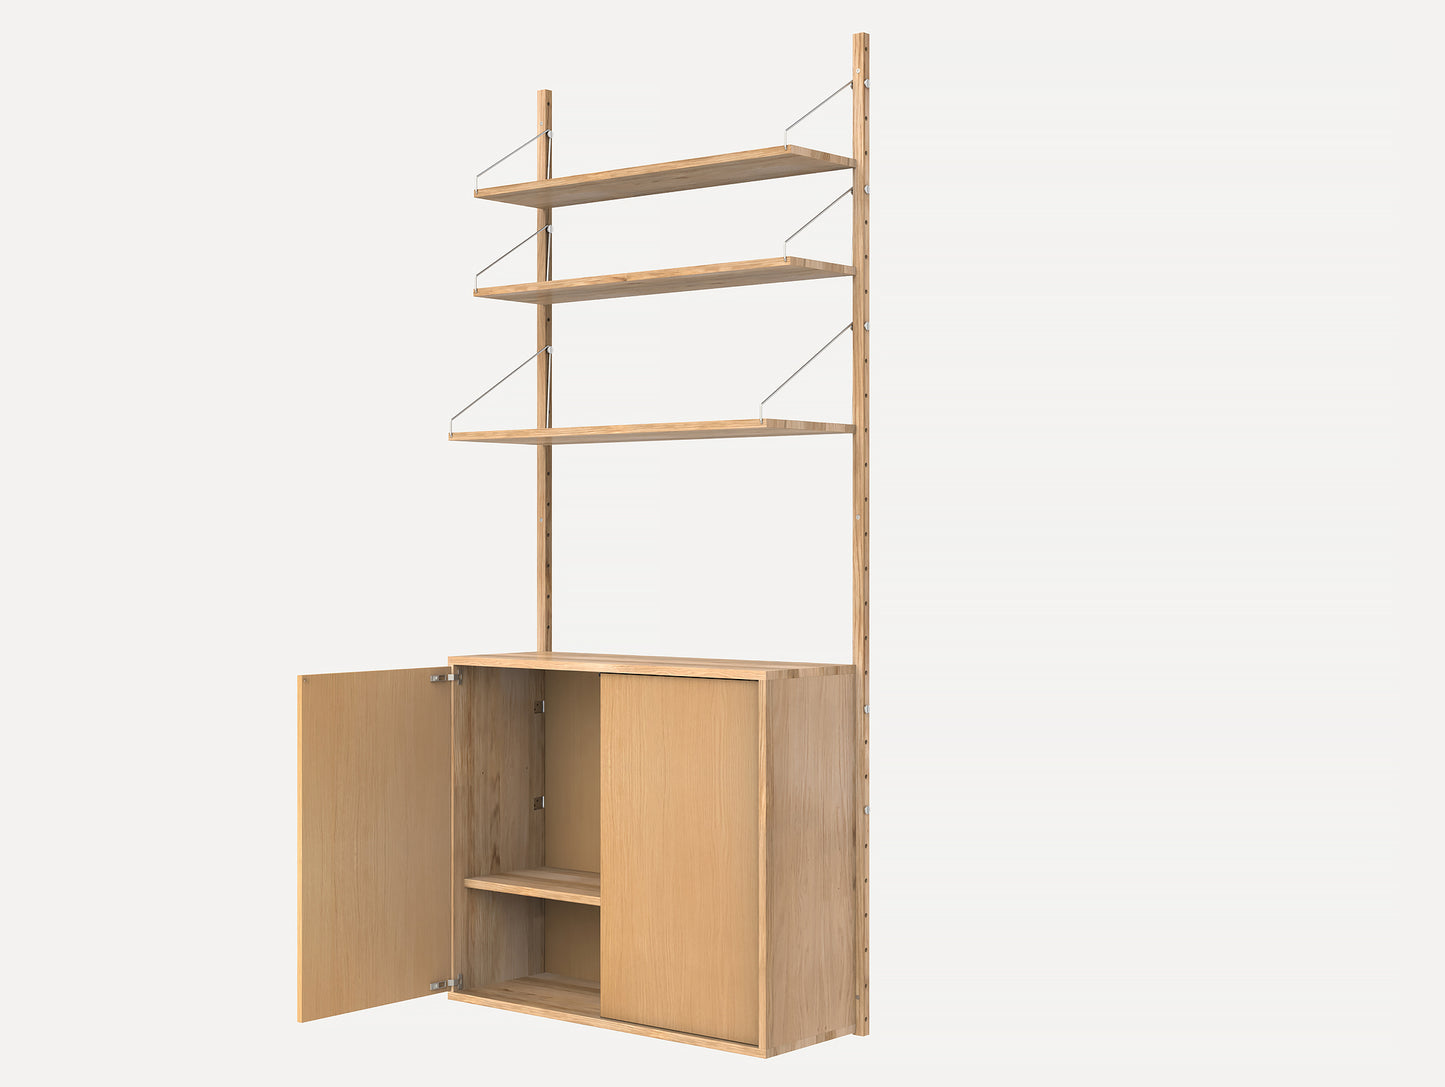 H1852 Cabinet Section (Medium) in Oiled Oak with 3 x Shelves